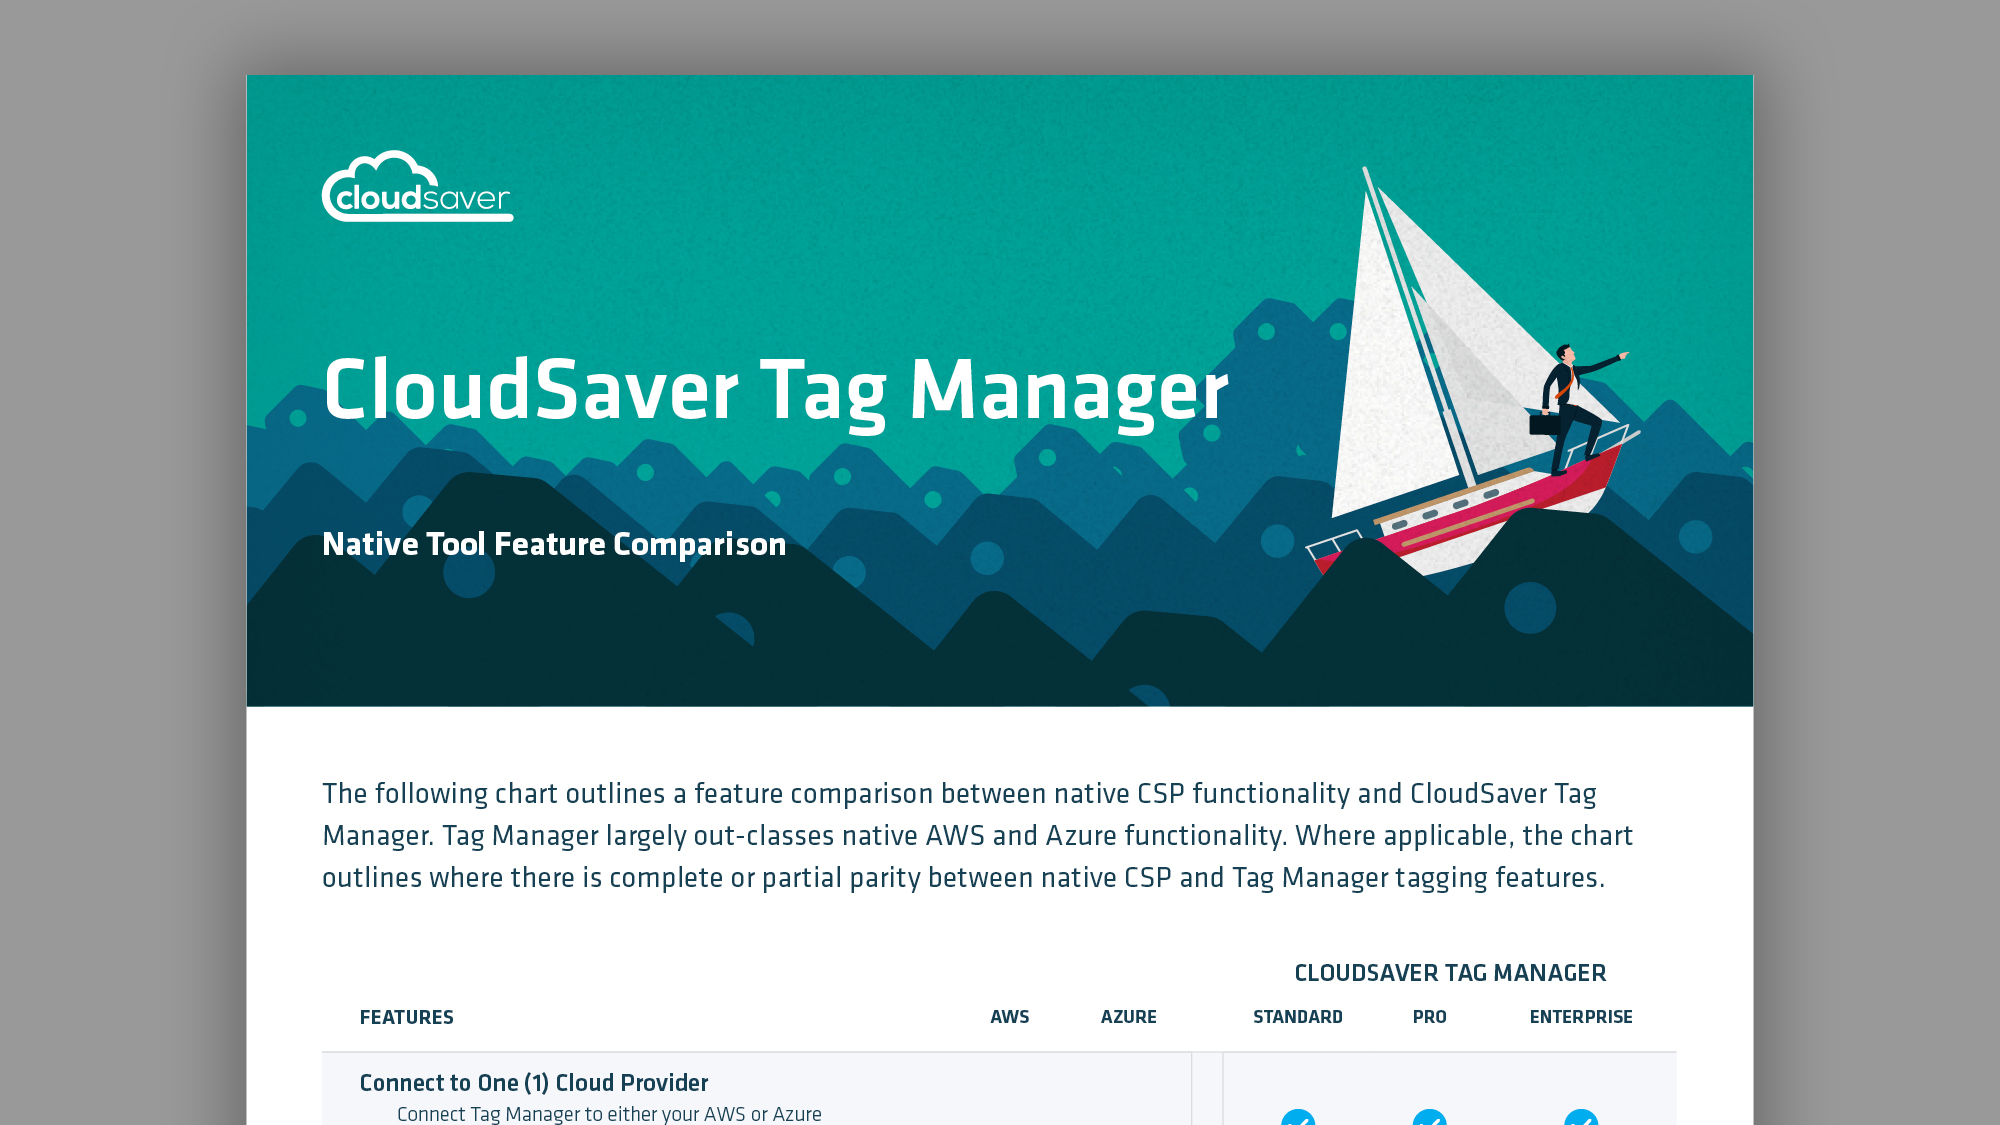 Tag Manager Overview